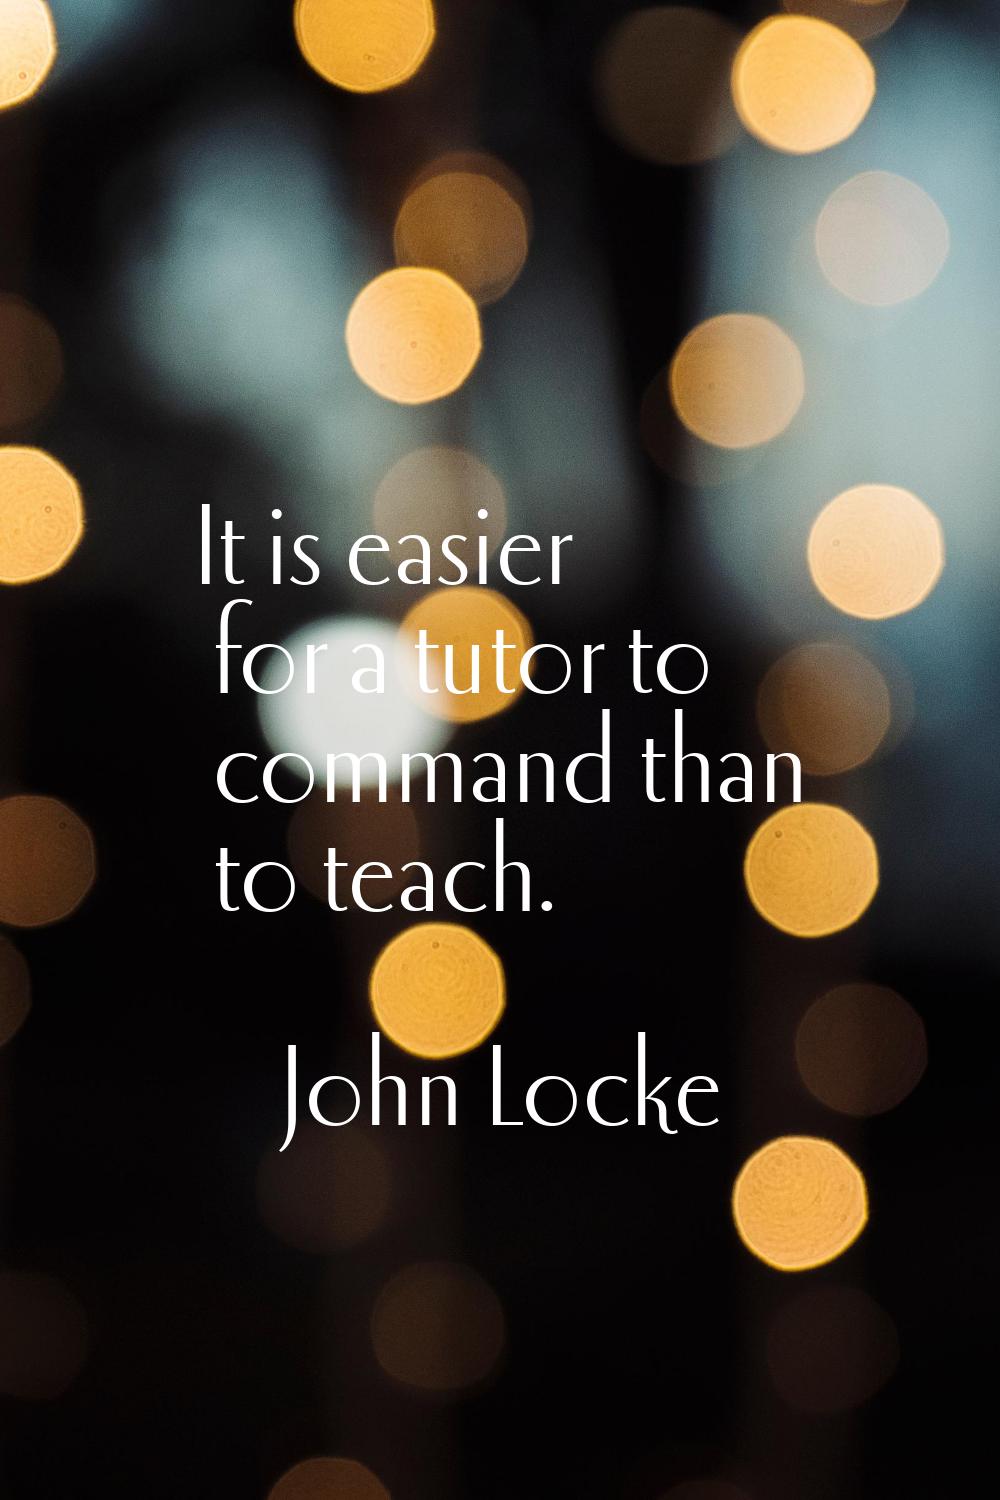 It is easier for a tutor to command than to teach.